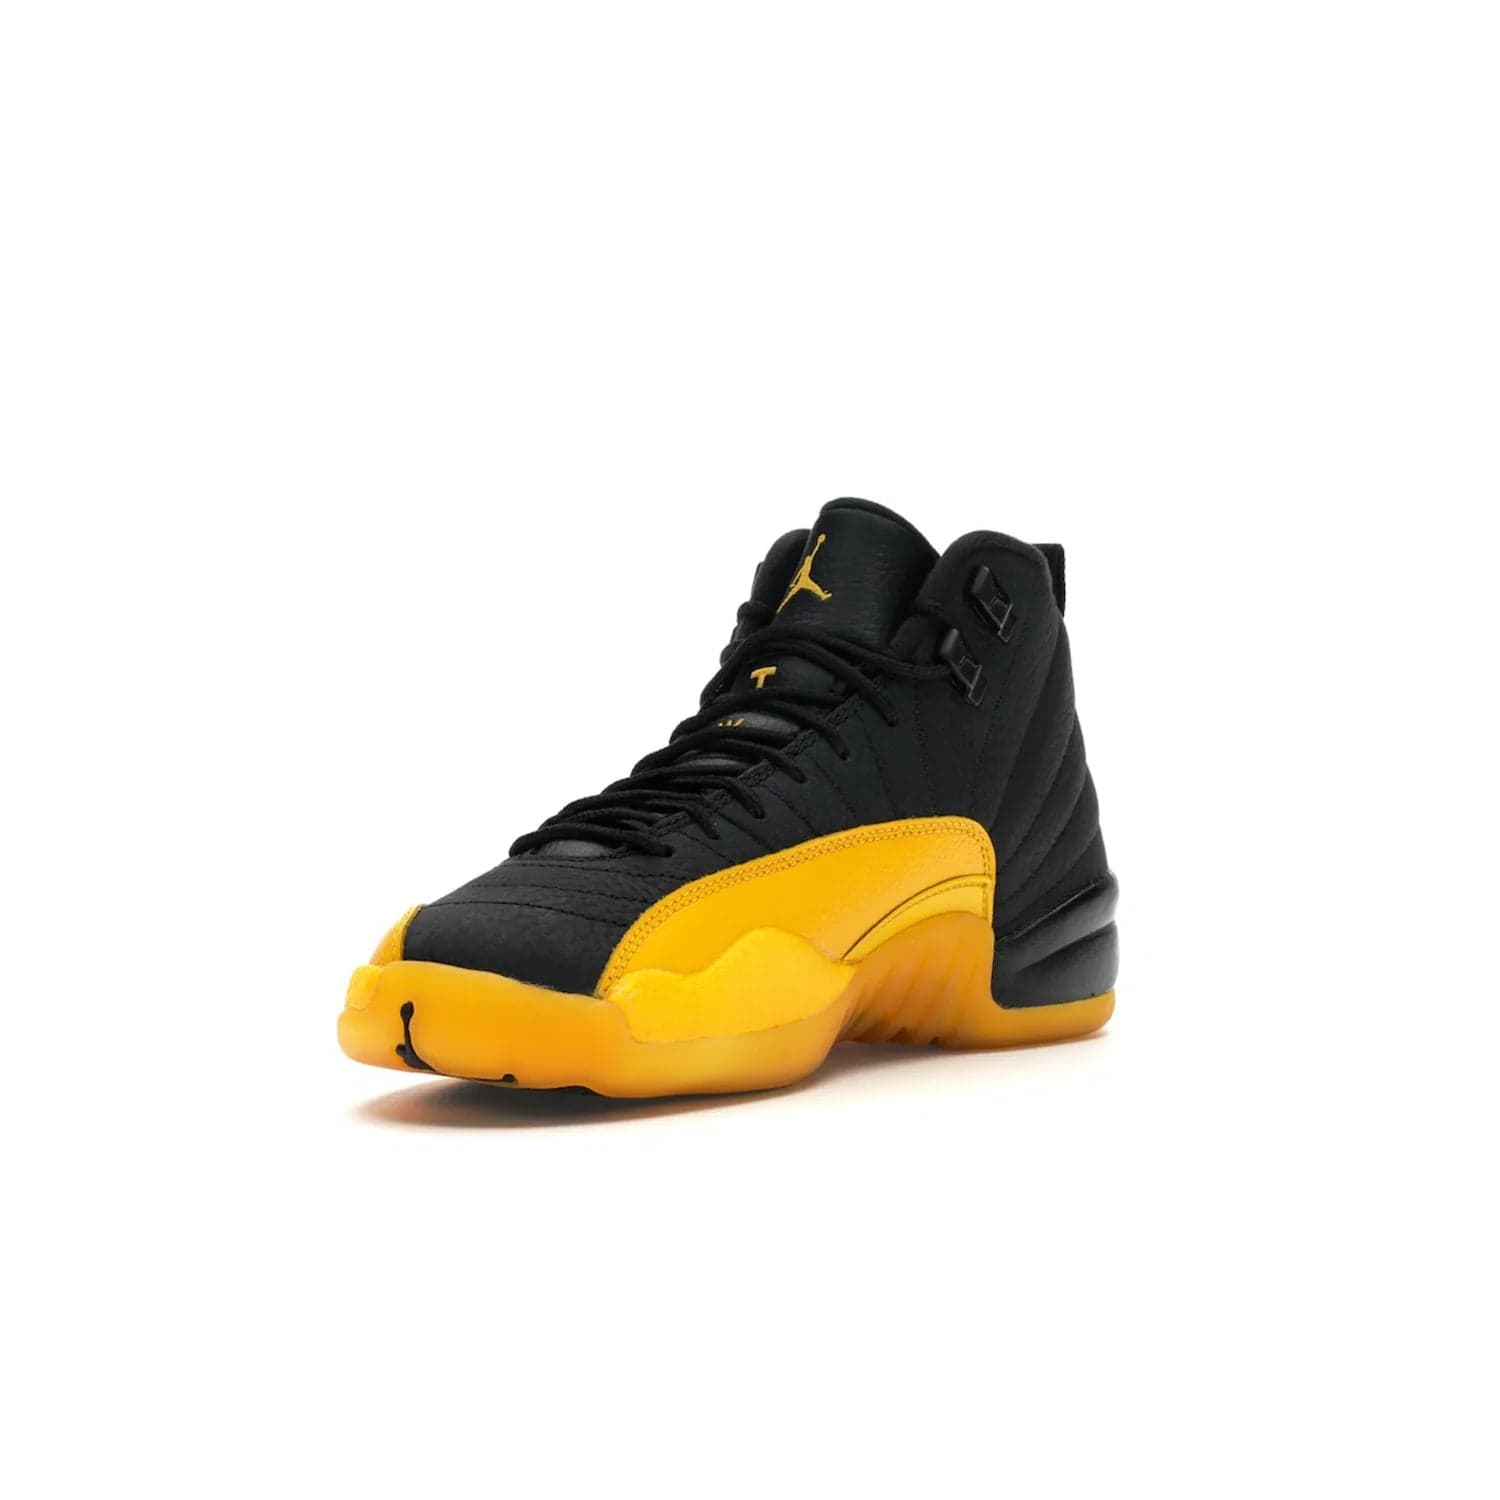 Jordan 12 Retro Black University Gold (GS) - Image 14 - Only at www.BallersClubKickz.com - Upgrade your kid's shoe collection with the Jordan 12 Retro Black University Gold. With classic style, black tumbled leather upper, and University Gold accents, it's a great summer look. Out July 2020.